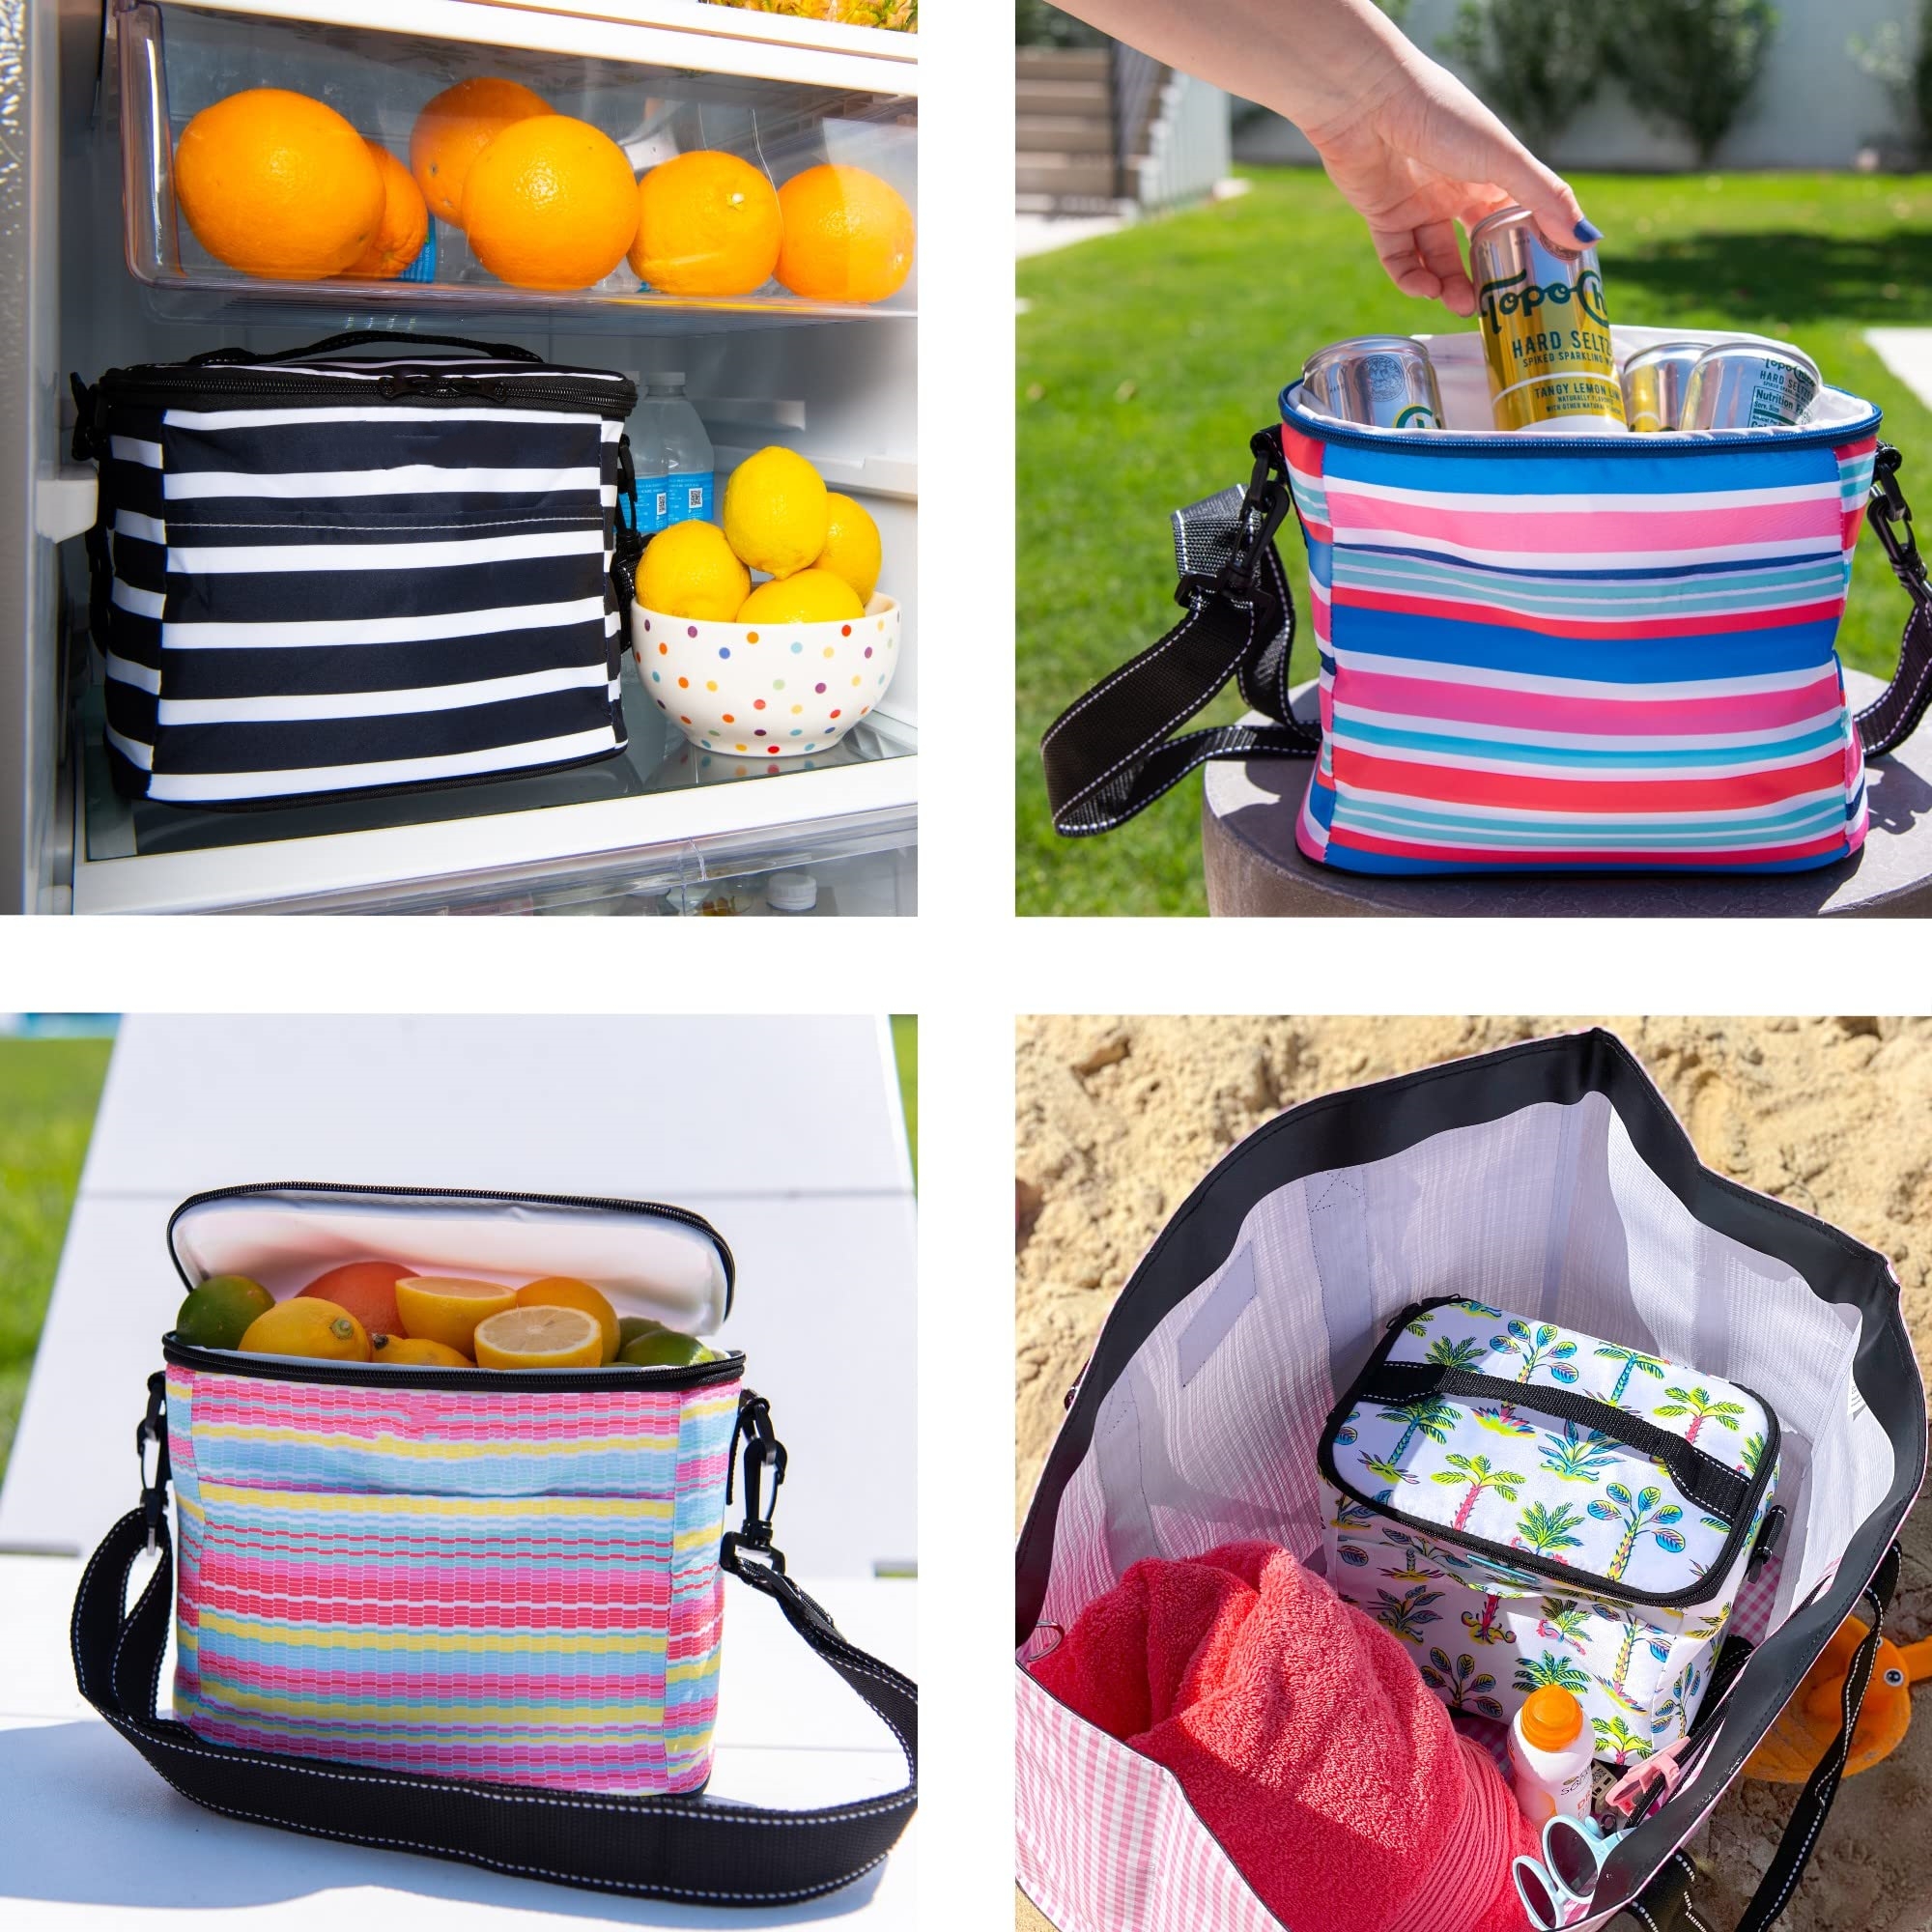 Soft Insulated Cooler for Beach Product Details